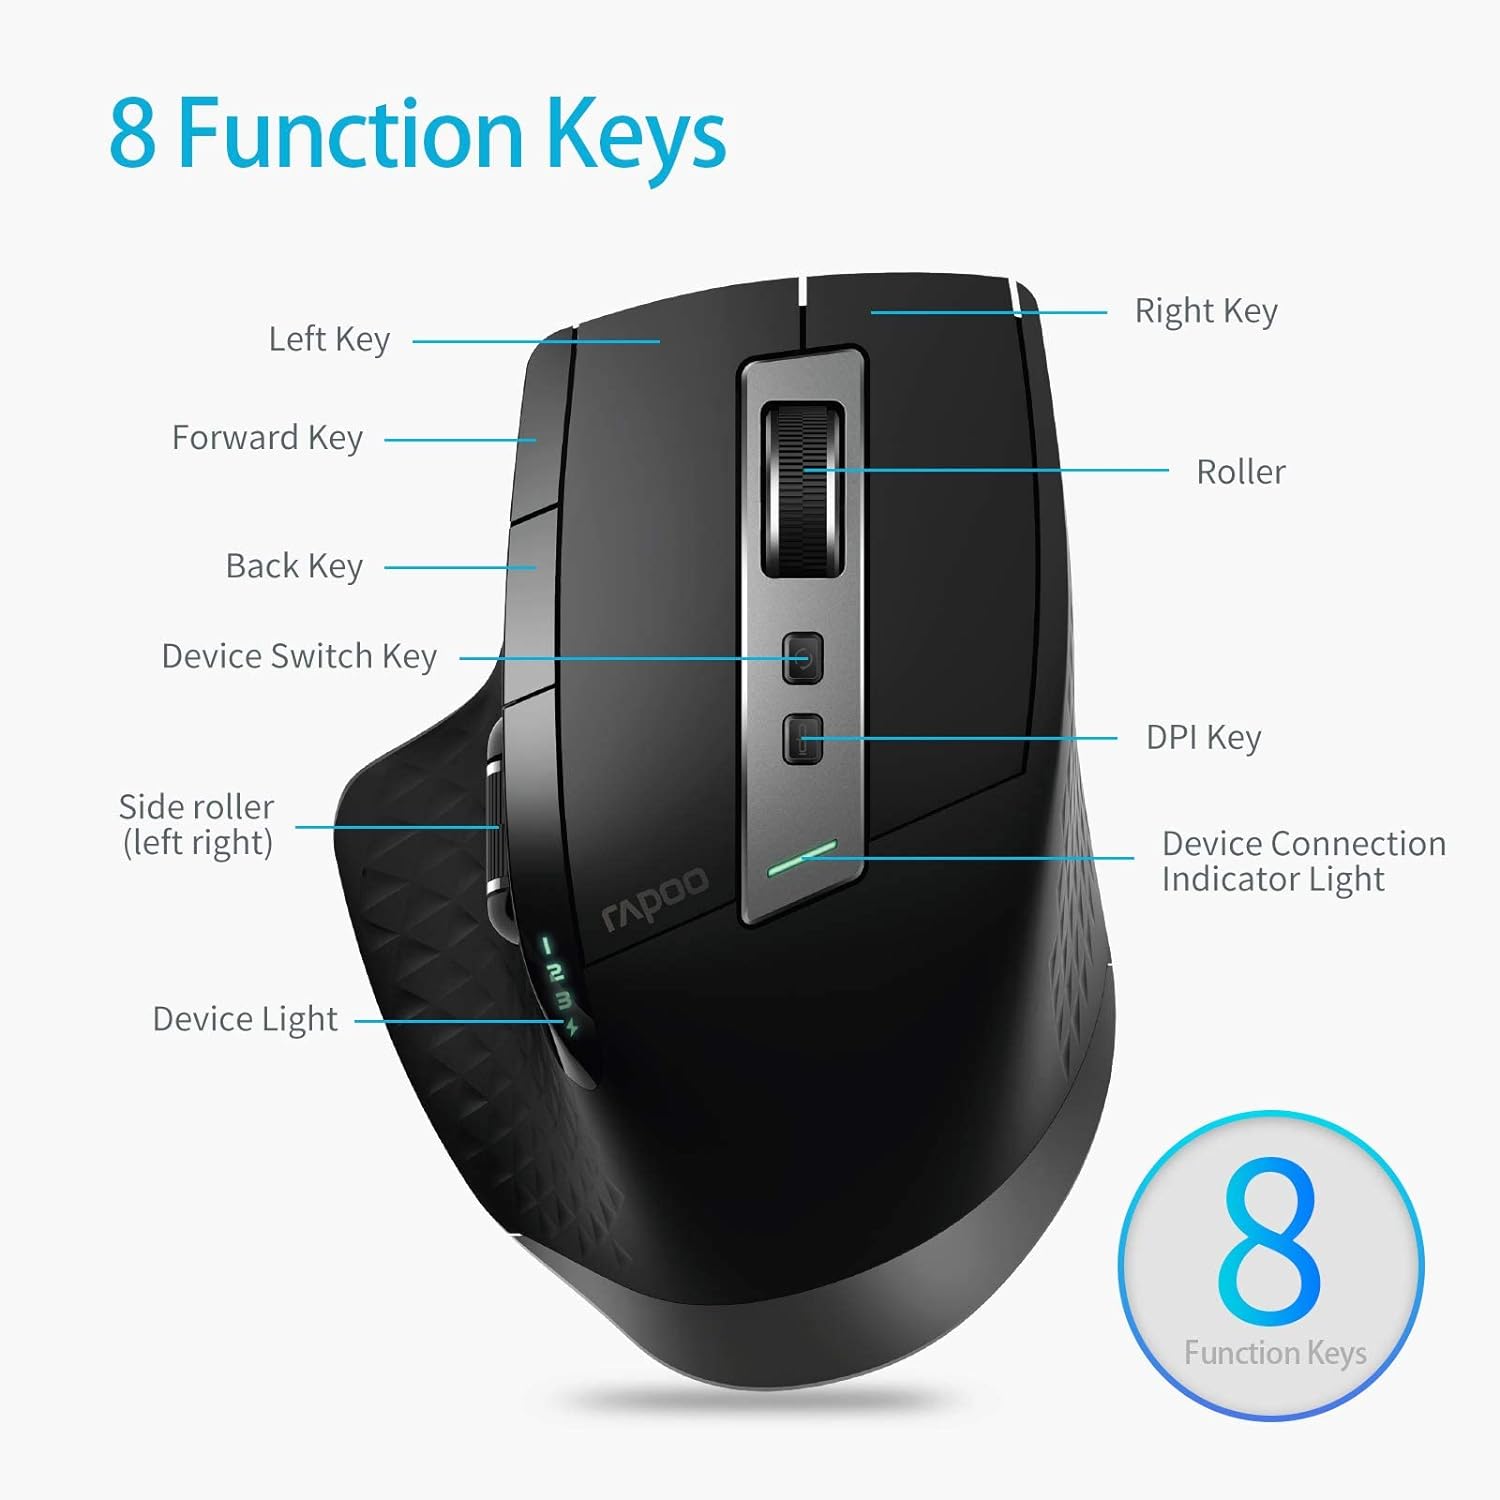 Critique of 'RAPOO Wireless Keyboard and Laser Mouse Combo, Multi Device (Bluetooth 4.0+3.0+2.4G) Keyboard and Mouse Set, Ultra-Slim Computer Keyboard Compact Design'